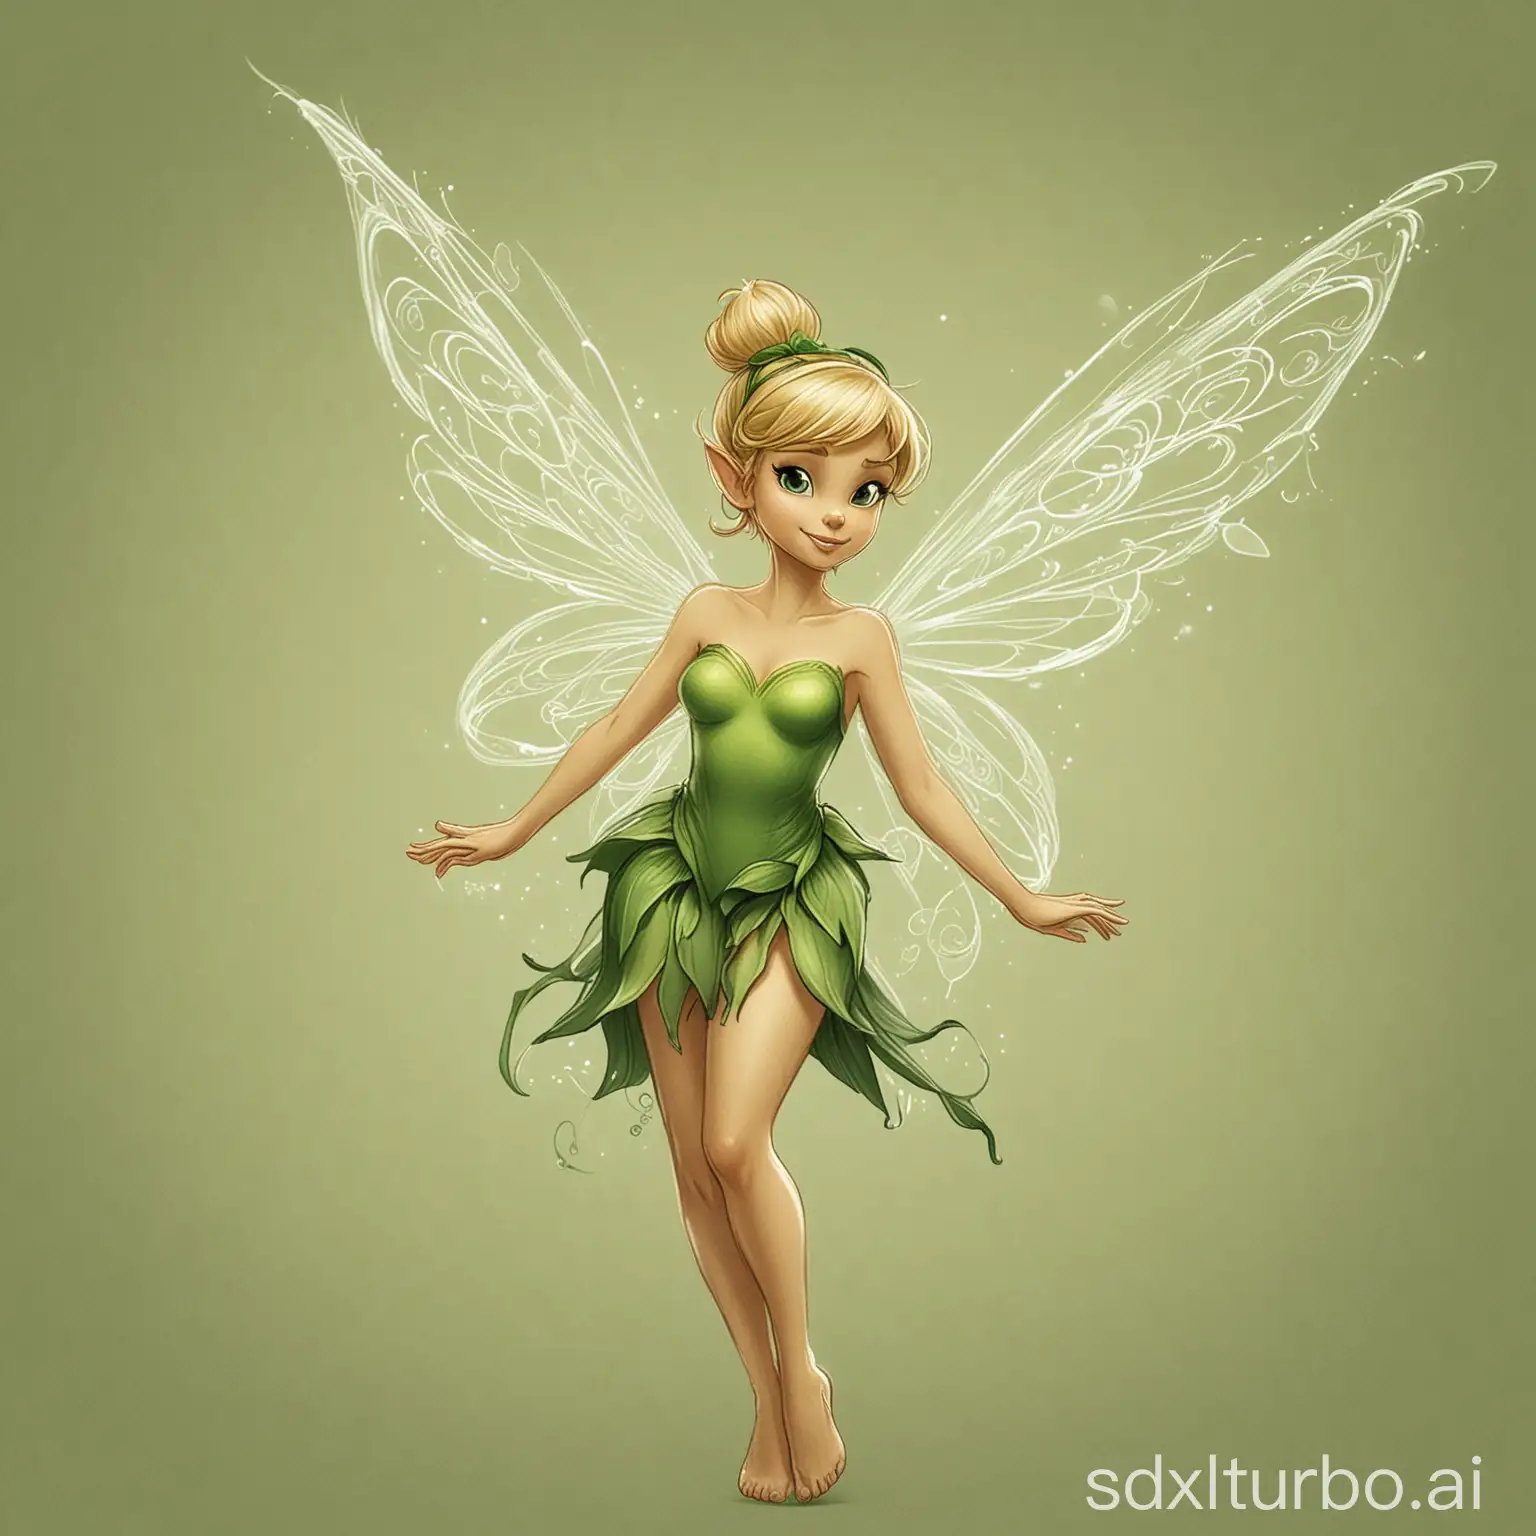 Tinkerbell-Fairy-Standing-with-Crossed-Arms-on-Green-Background